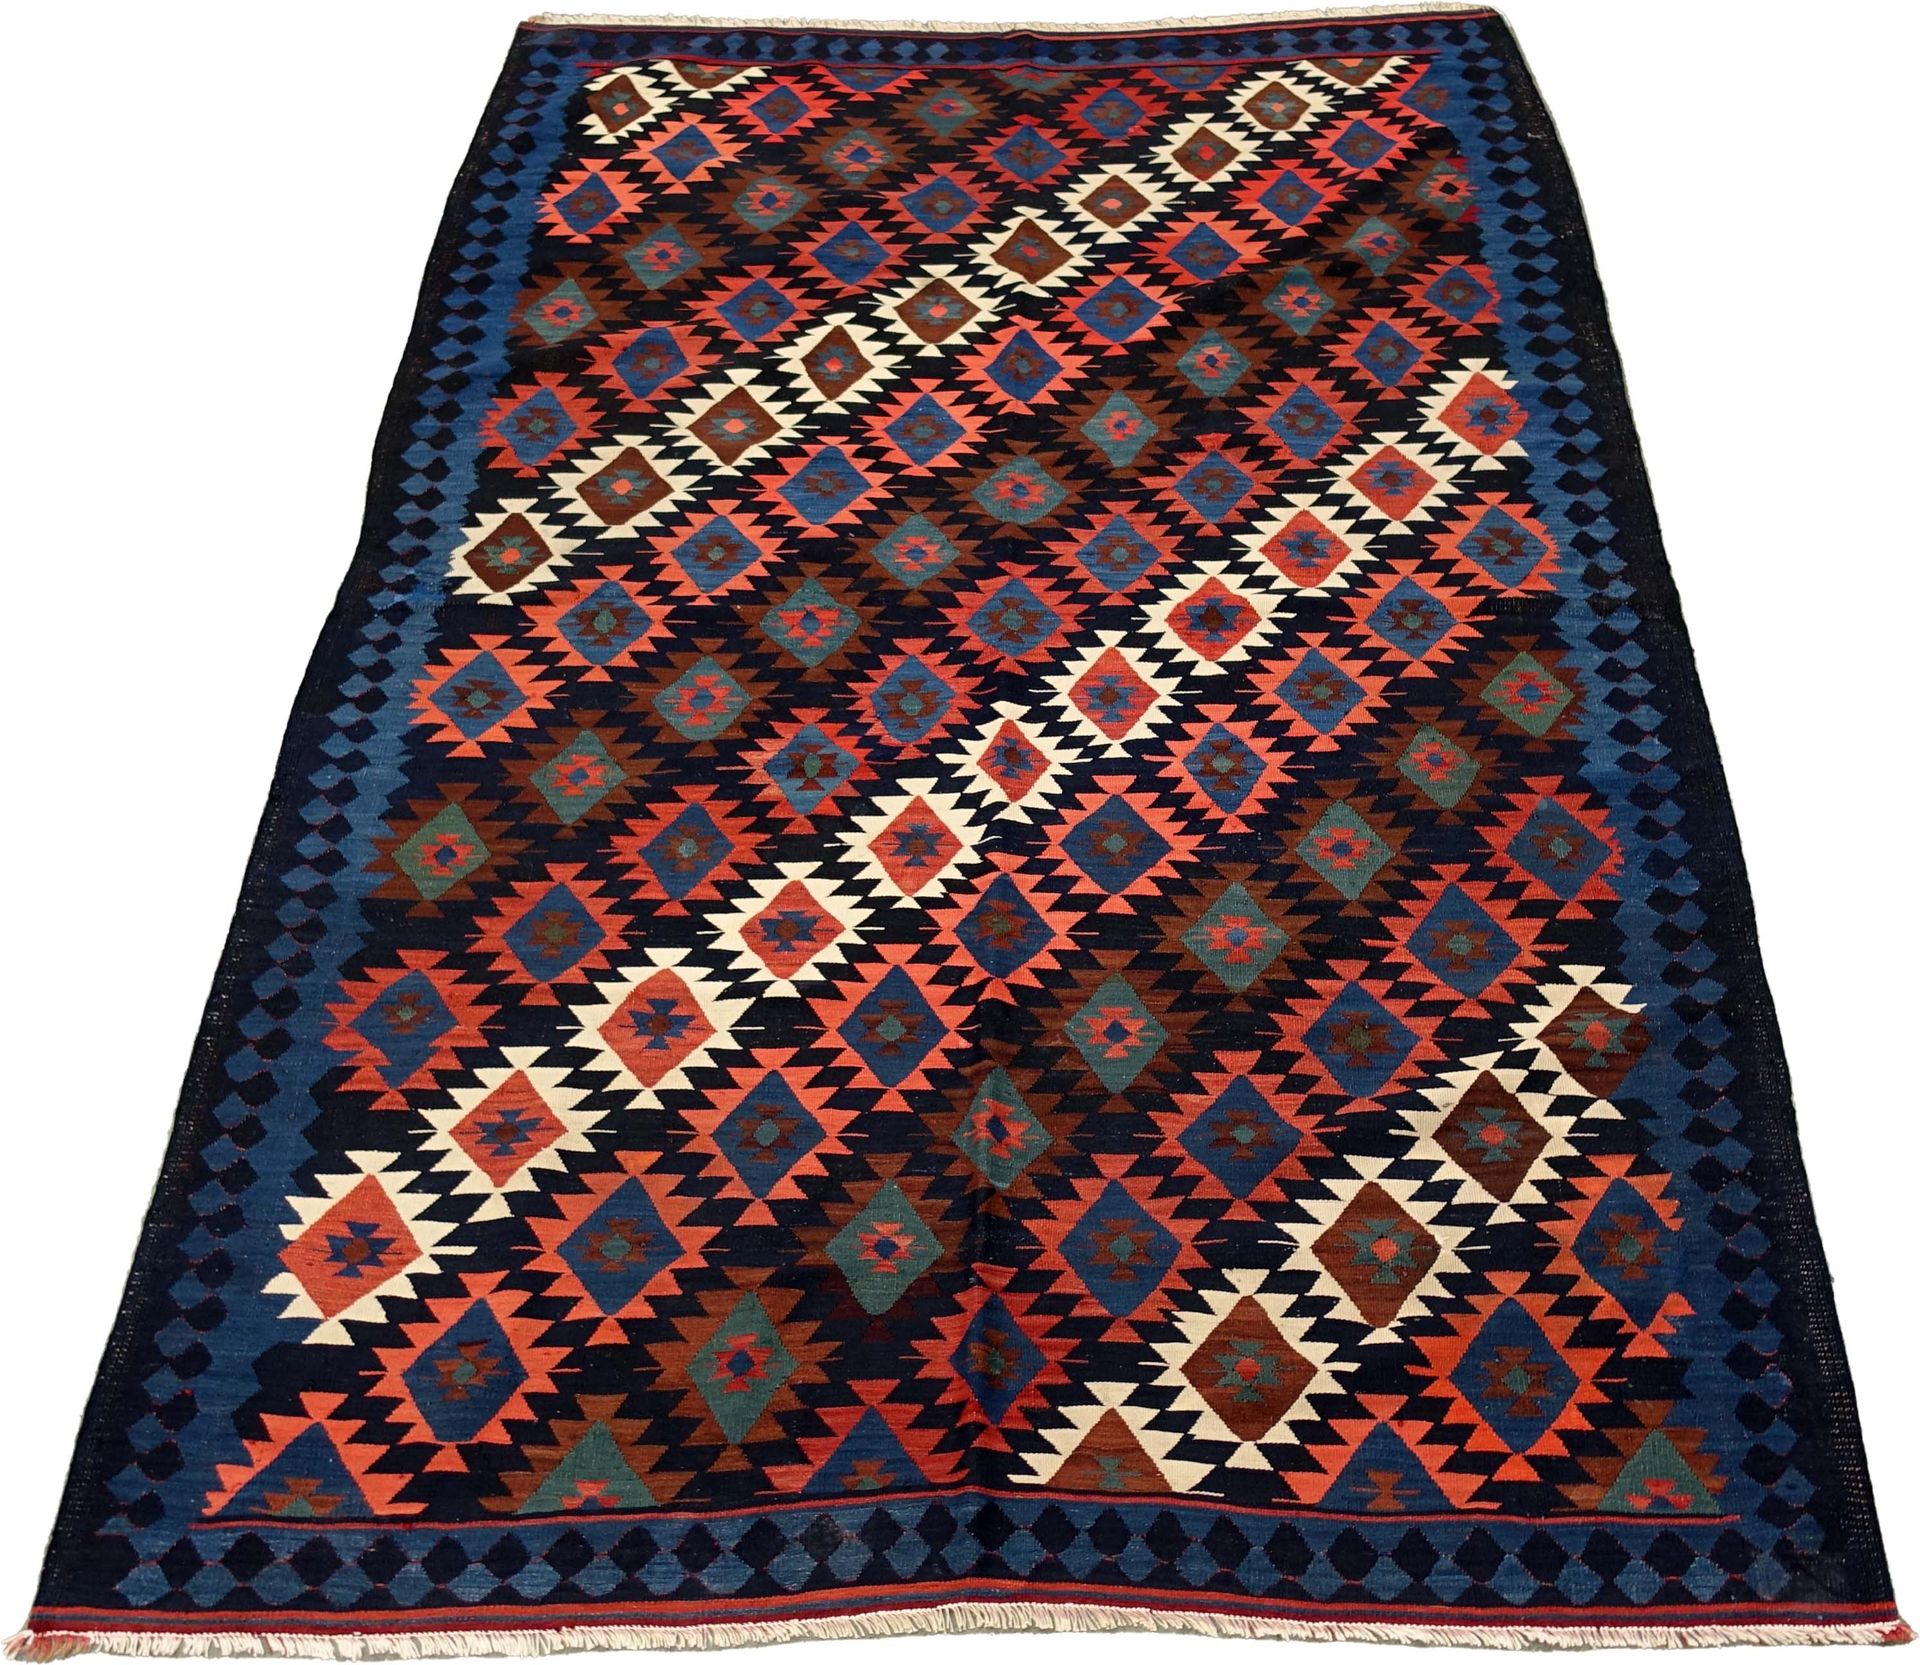 Tapis Kilim-Caucase. The background, black, is crossed by bands of geometrical a&hellip;